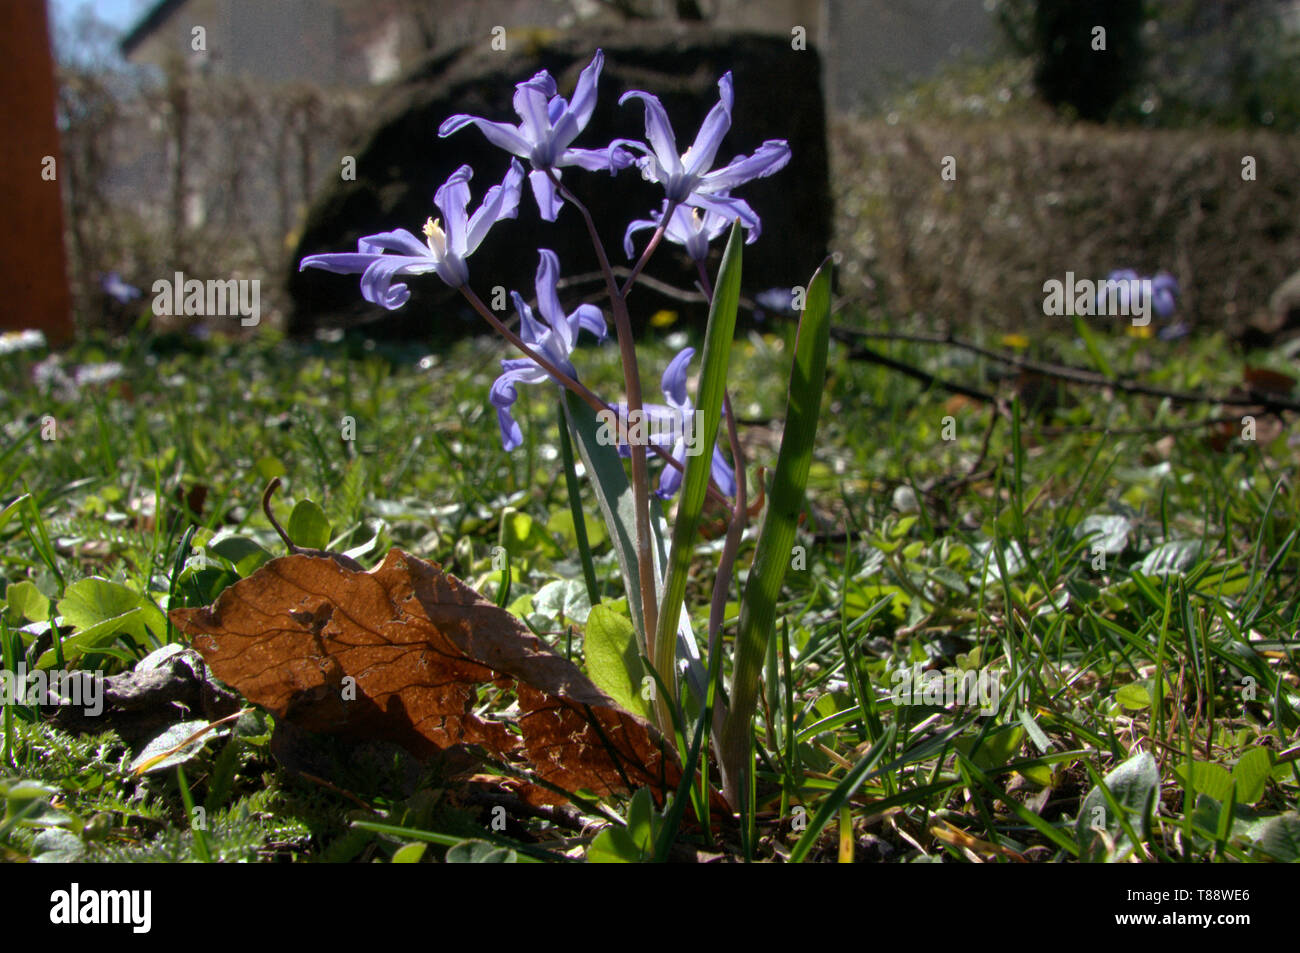 Chionodoxa sp.; glory-of-the-snow flowering on a Spring lawn in Munich Stock Photo